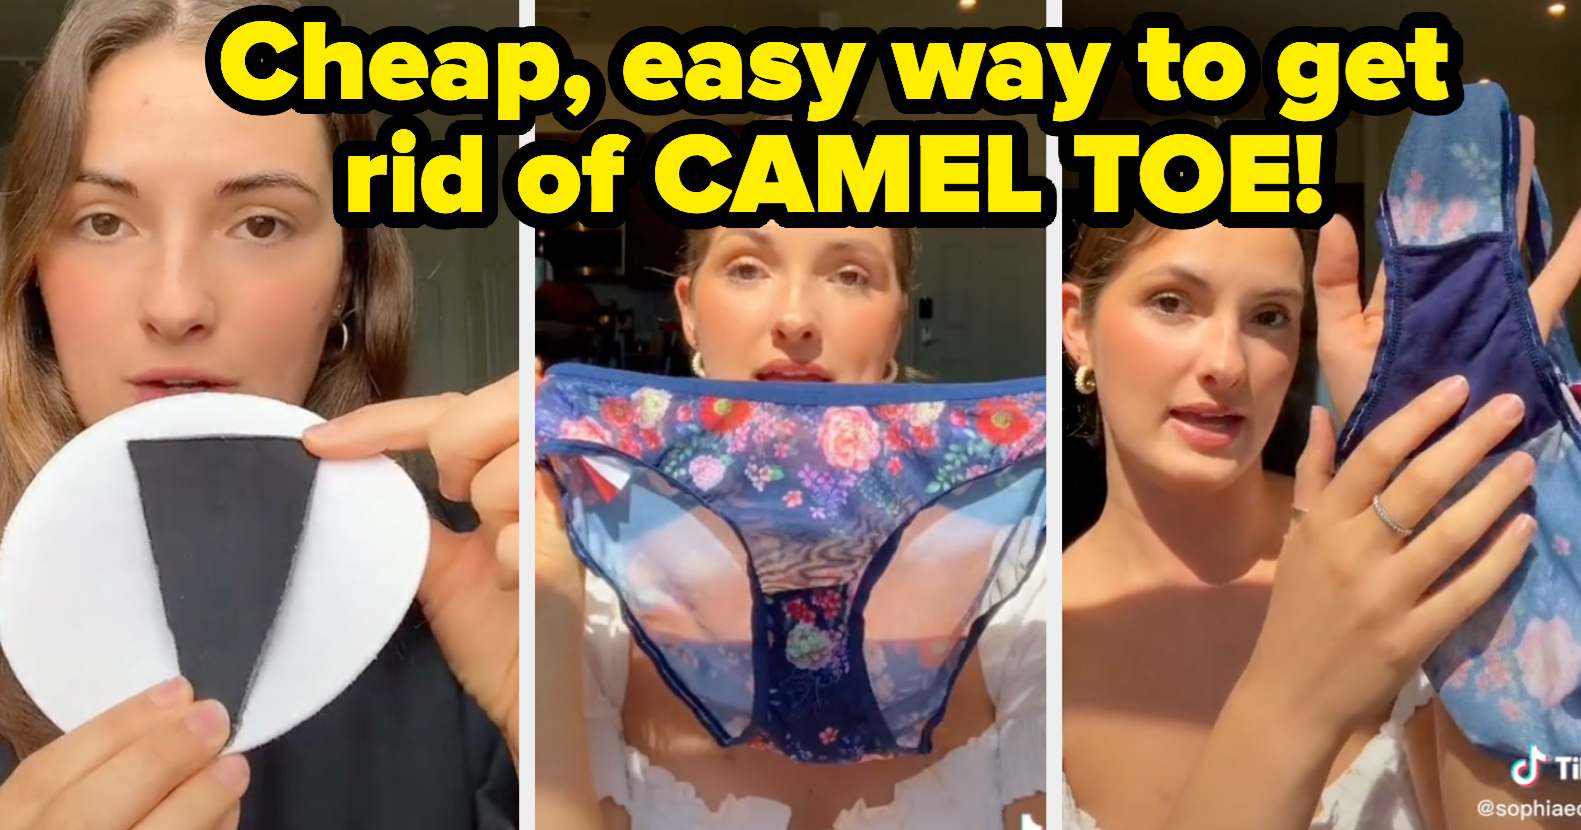 Simple Hack For Getting Rid Of Camel Toe On TikTok